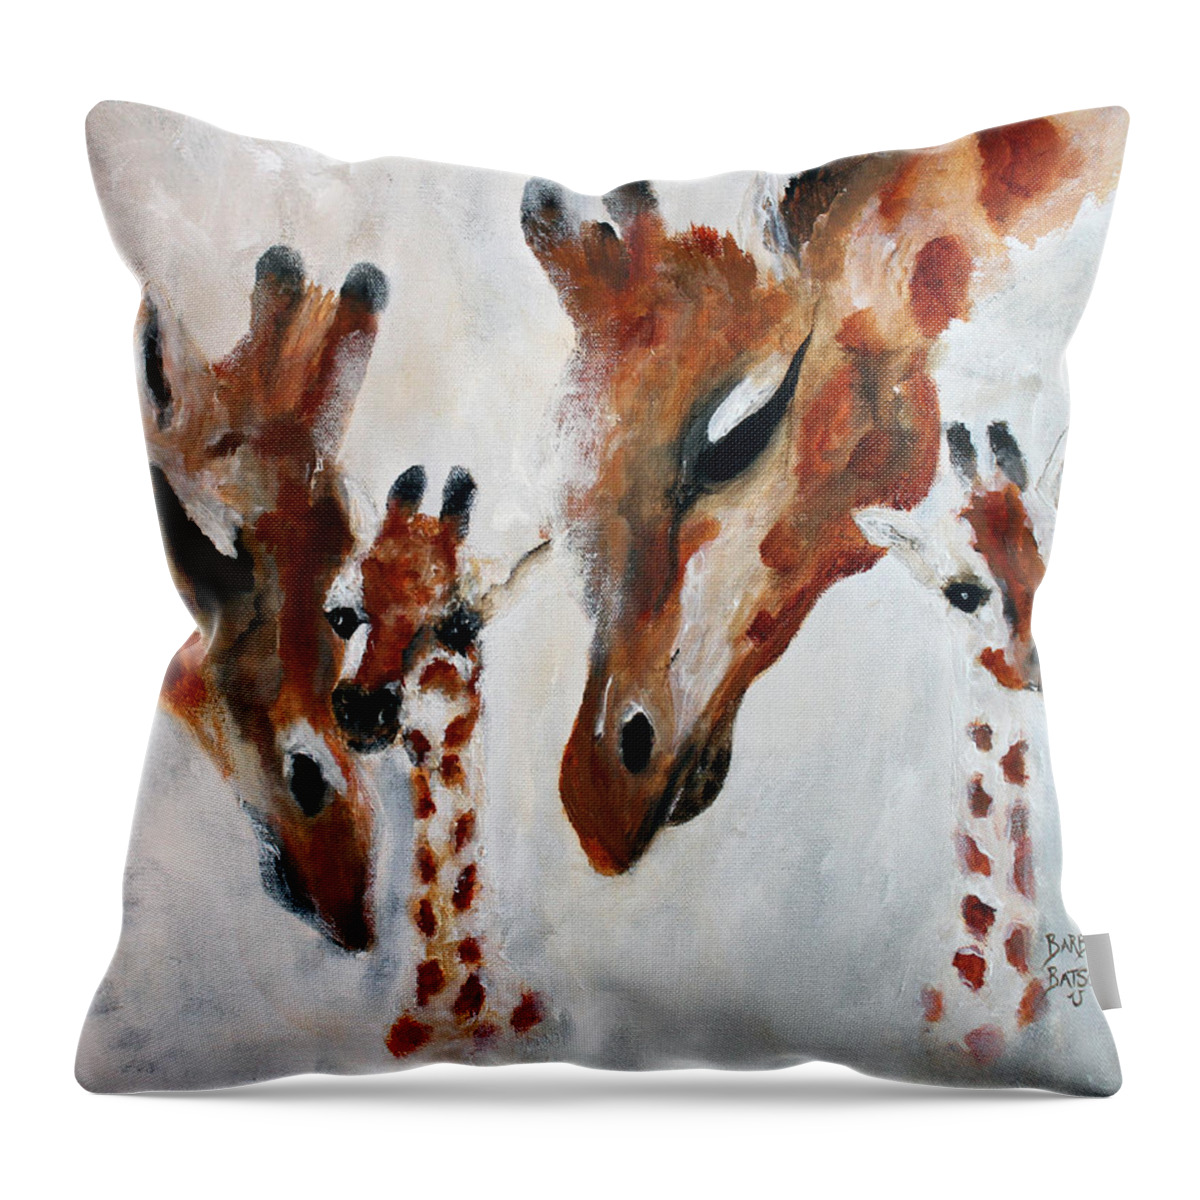 Giraffe Throw Pillow featuring the painting Giraffes - Oh Baby by Barbie Batson